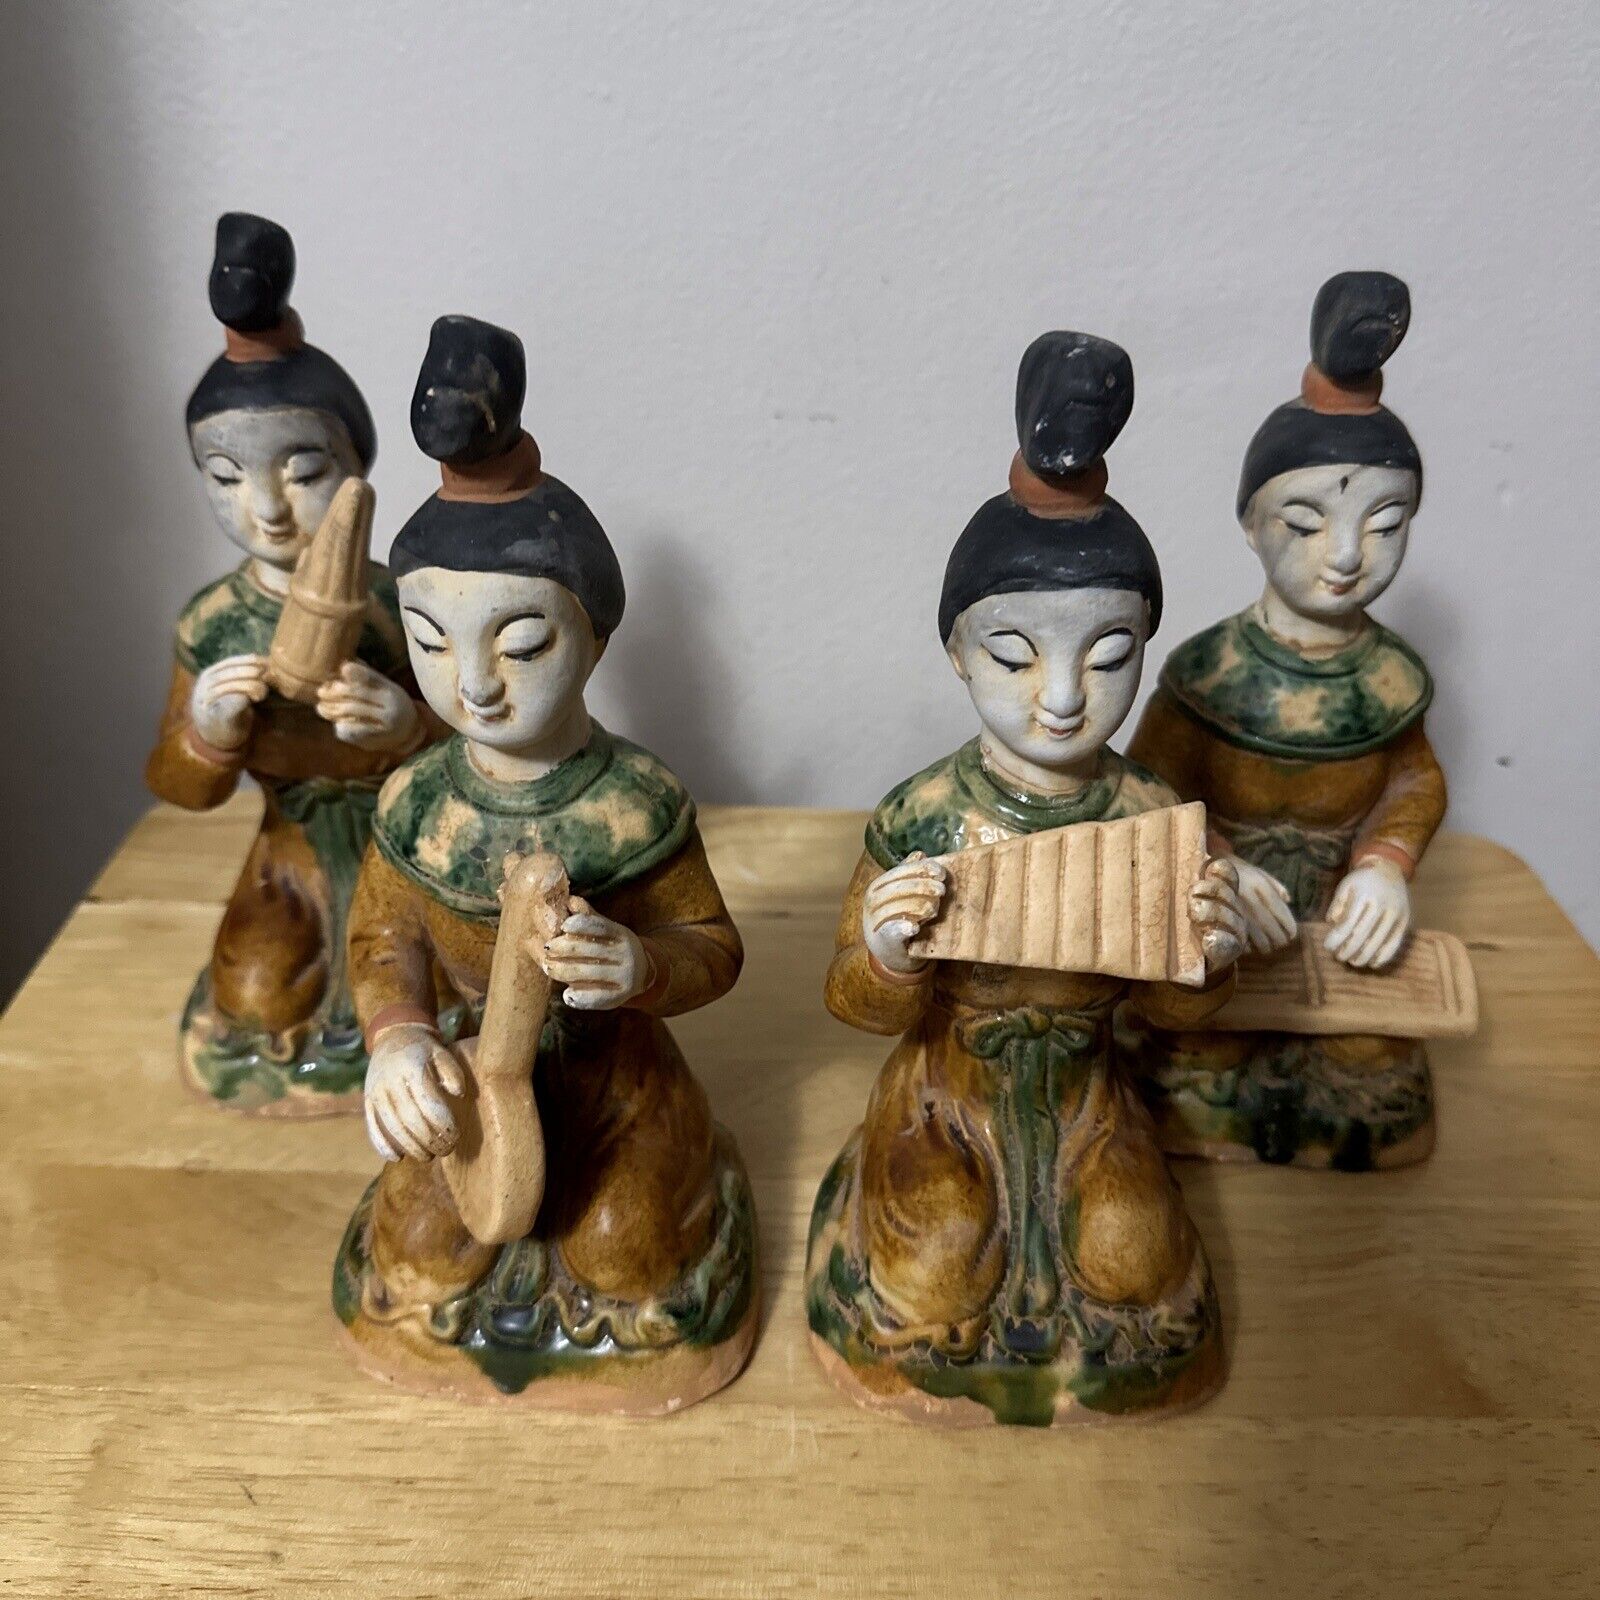 4pc set Vintage Chinese Musician Porcelain Figurines Cracquelure Hand Painted